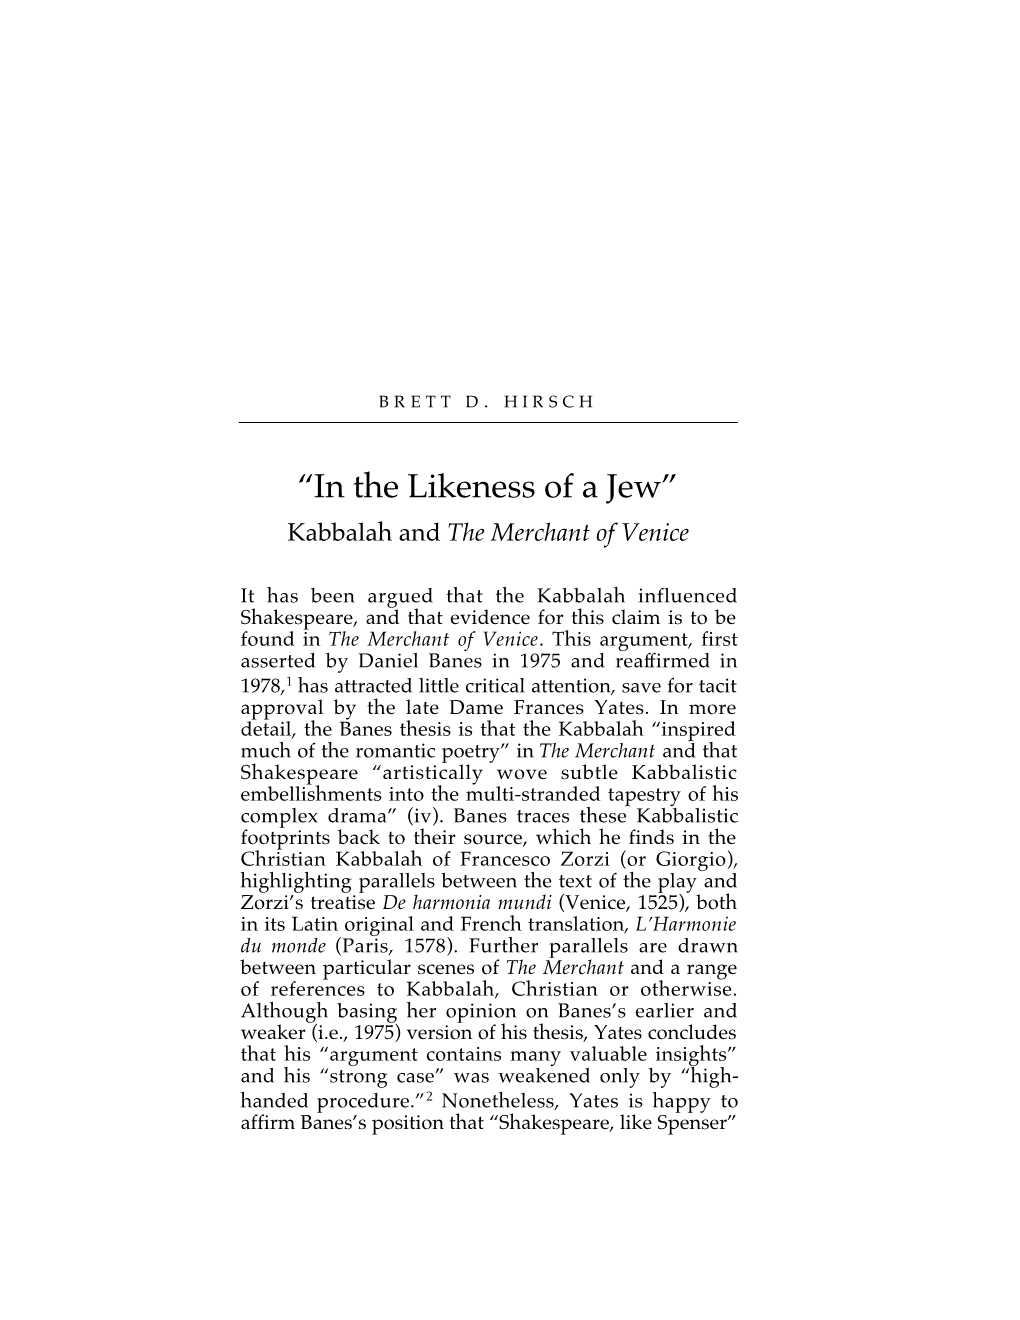 “In the Likeness of a Jew” Kabbalah and the Merchant of Venice